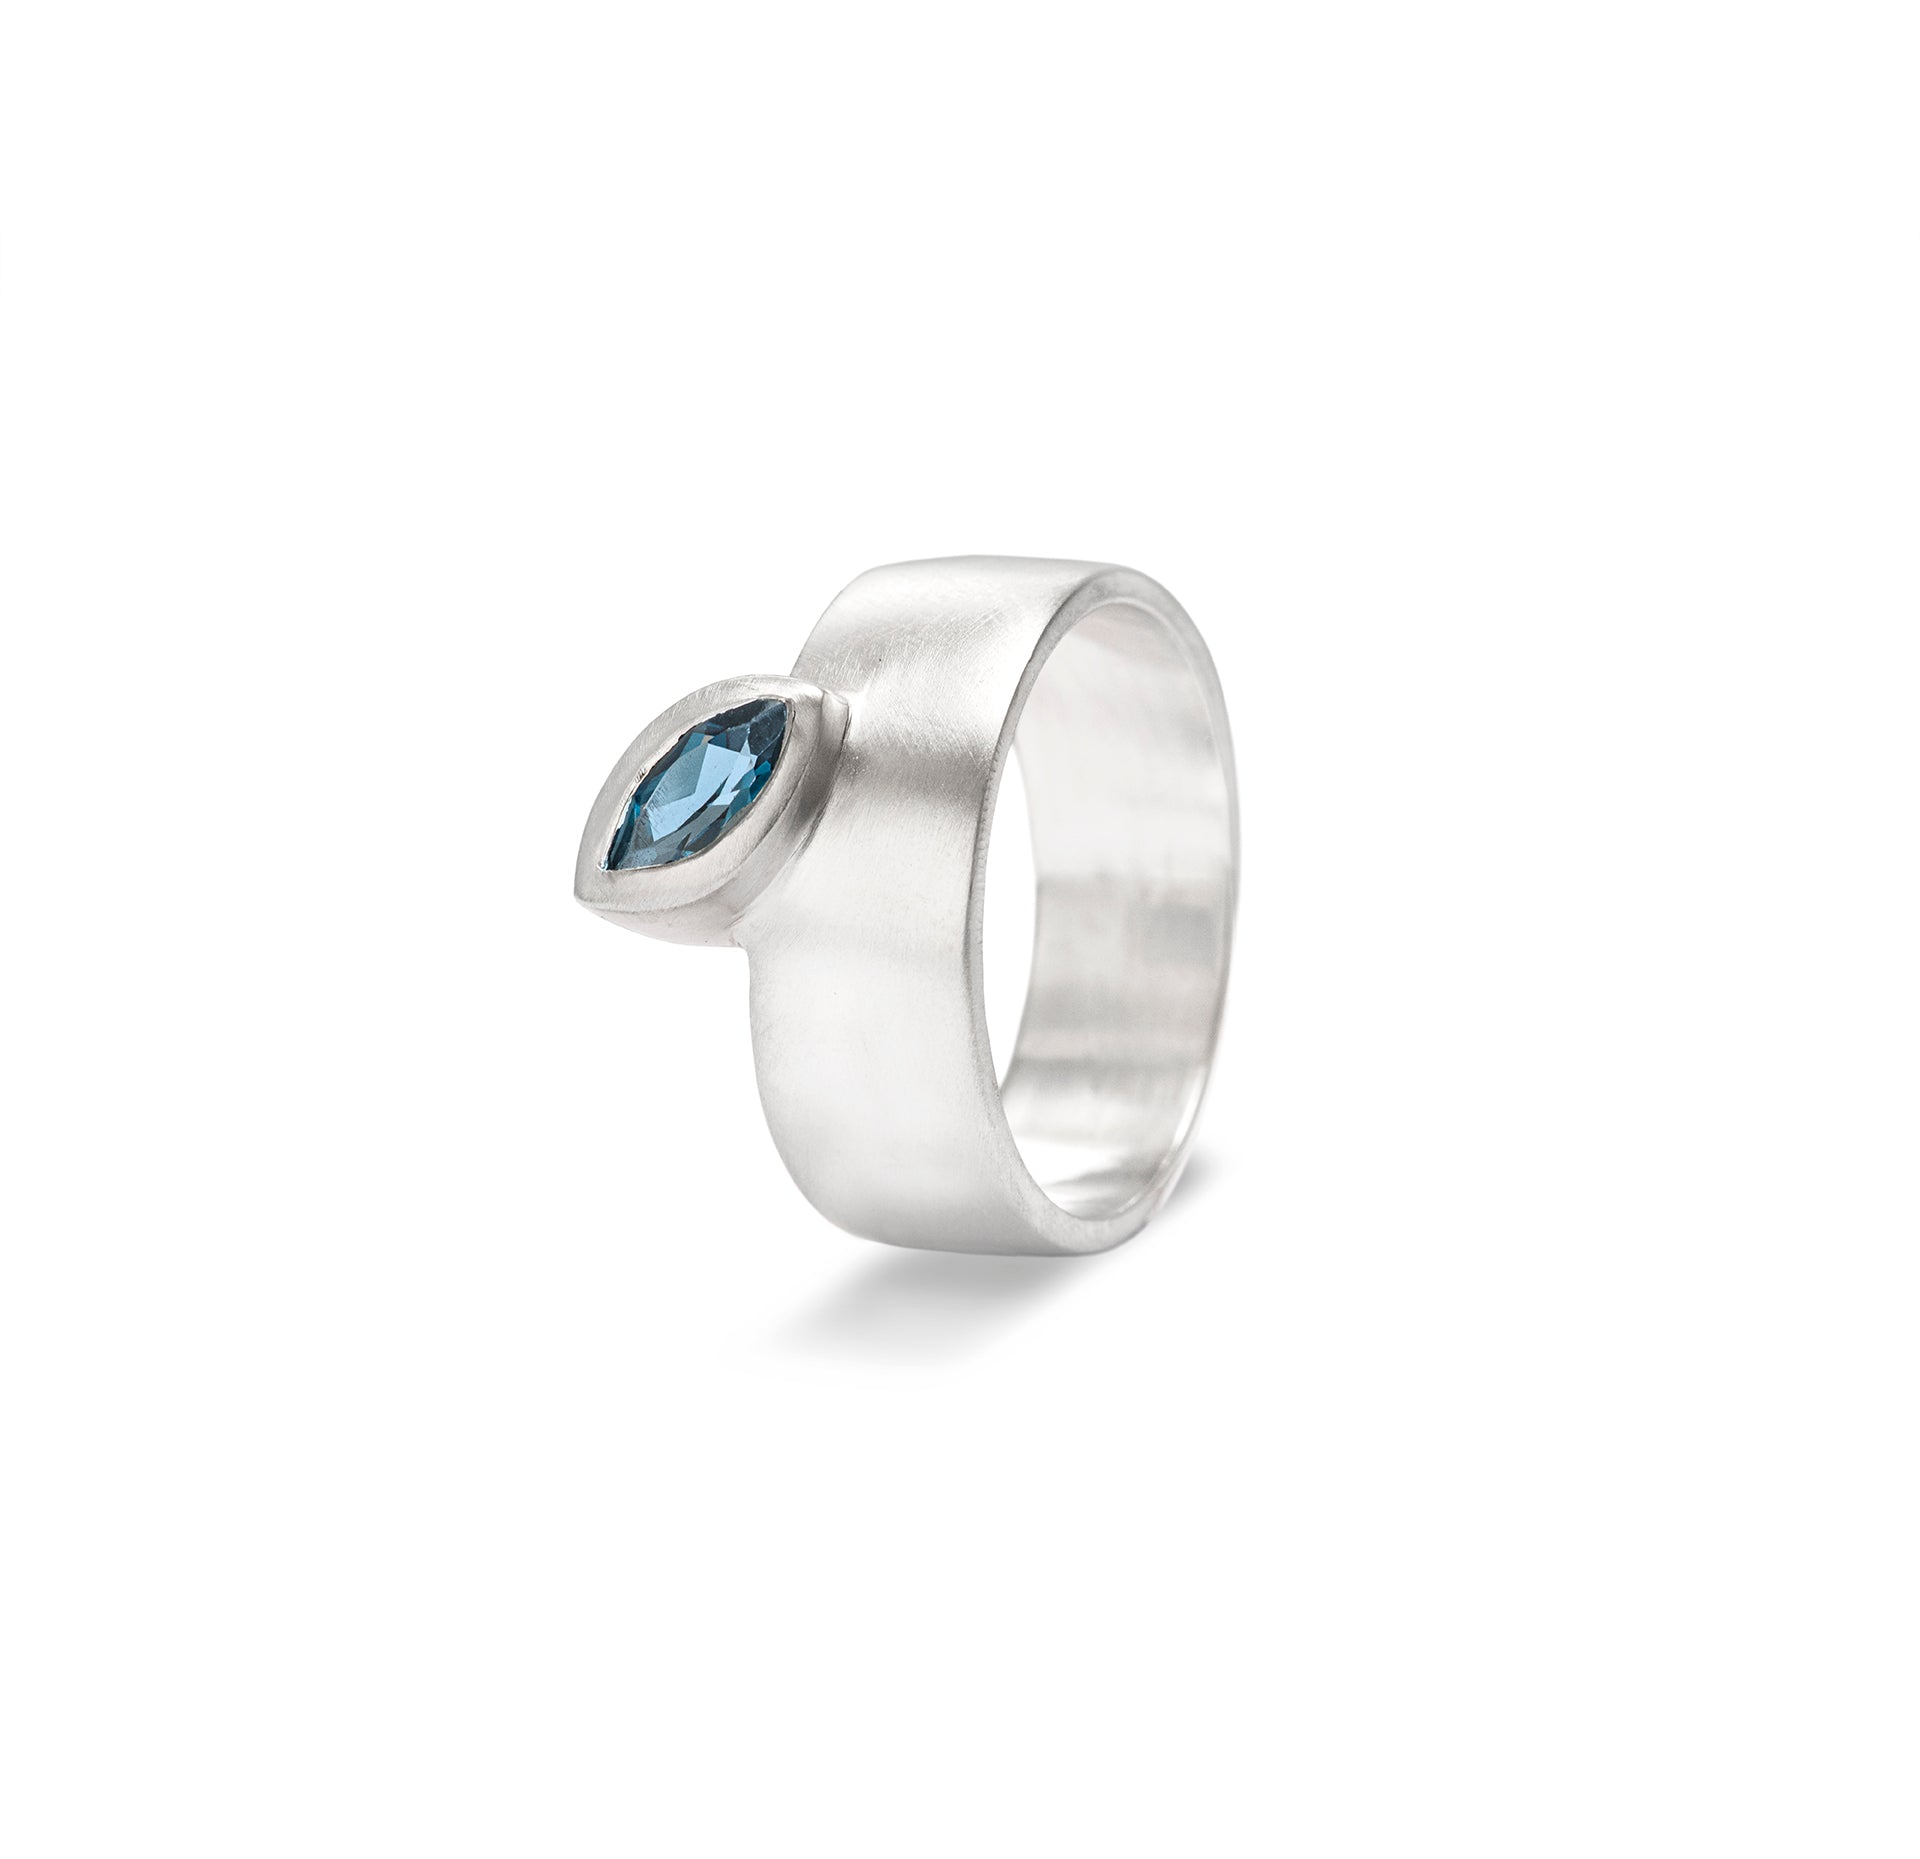 Satin Finish Sterling silver Unbalanced Ring and Swiss Blue Topaz